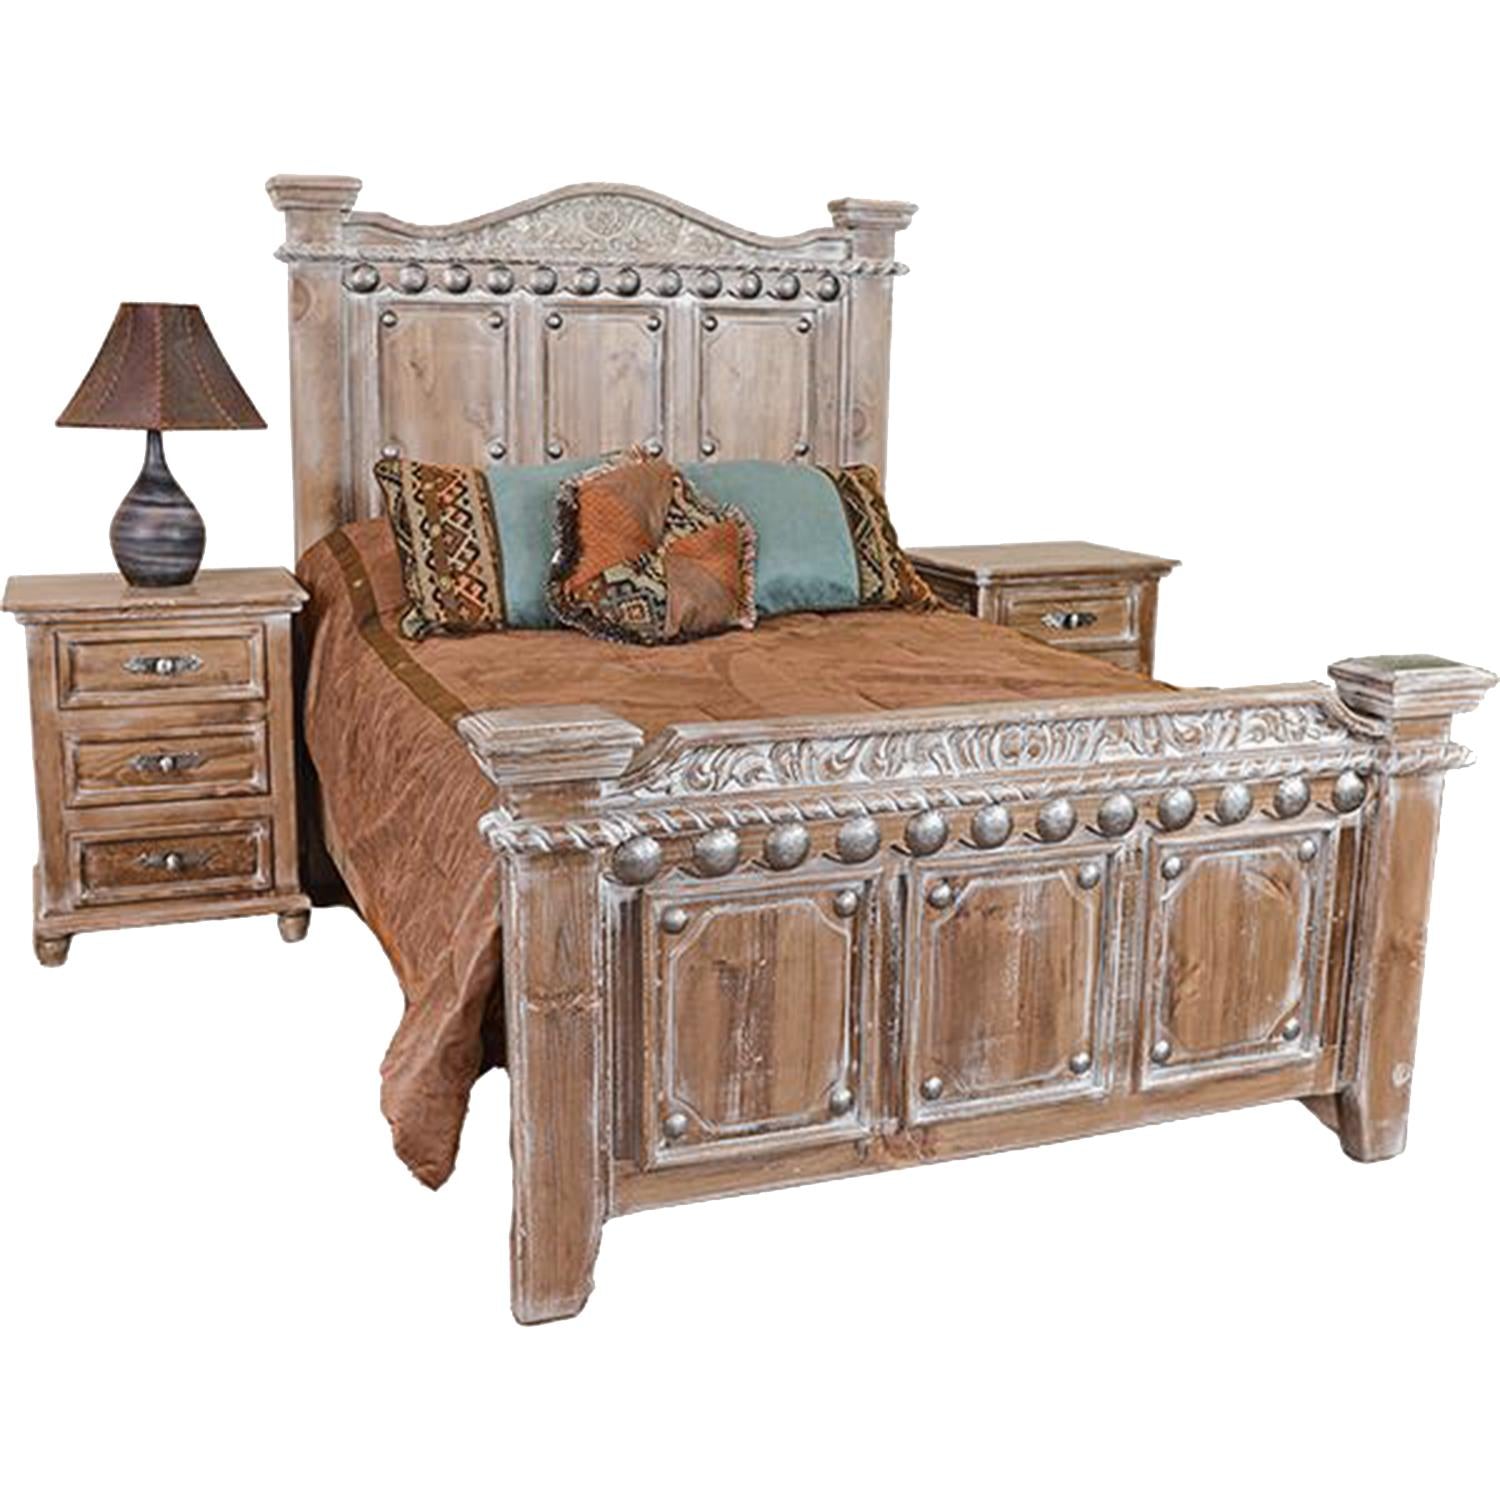 Rio Hondo Collection King Bed & 2 Nightstands Set